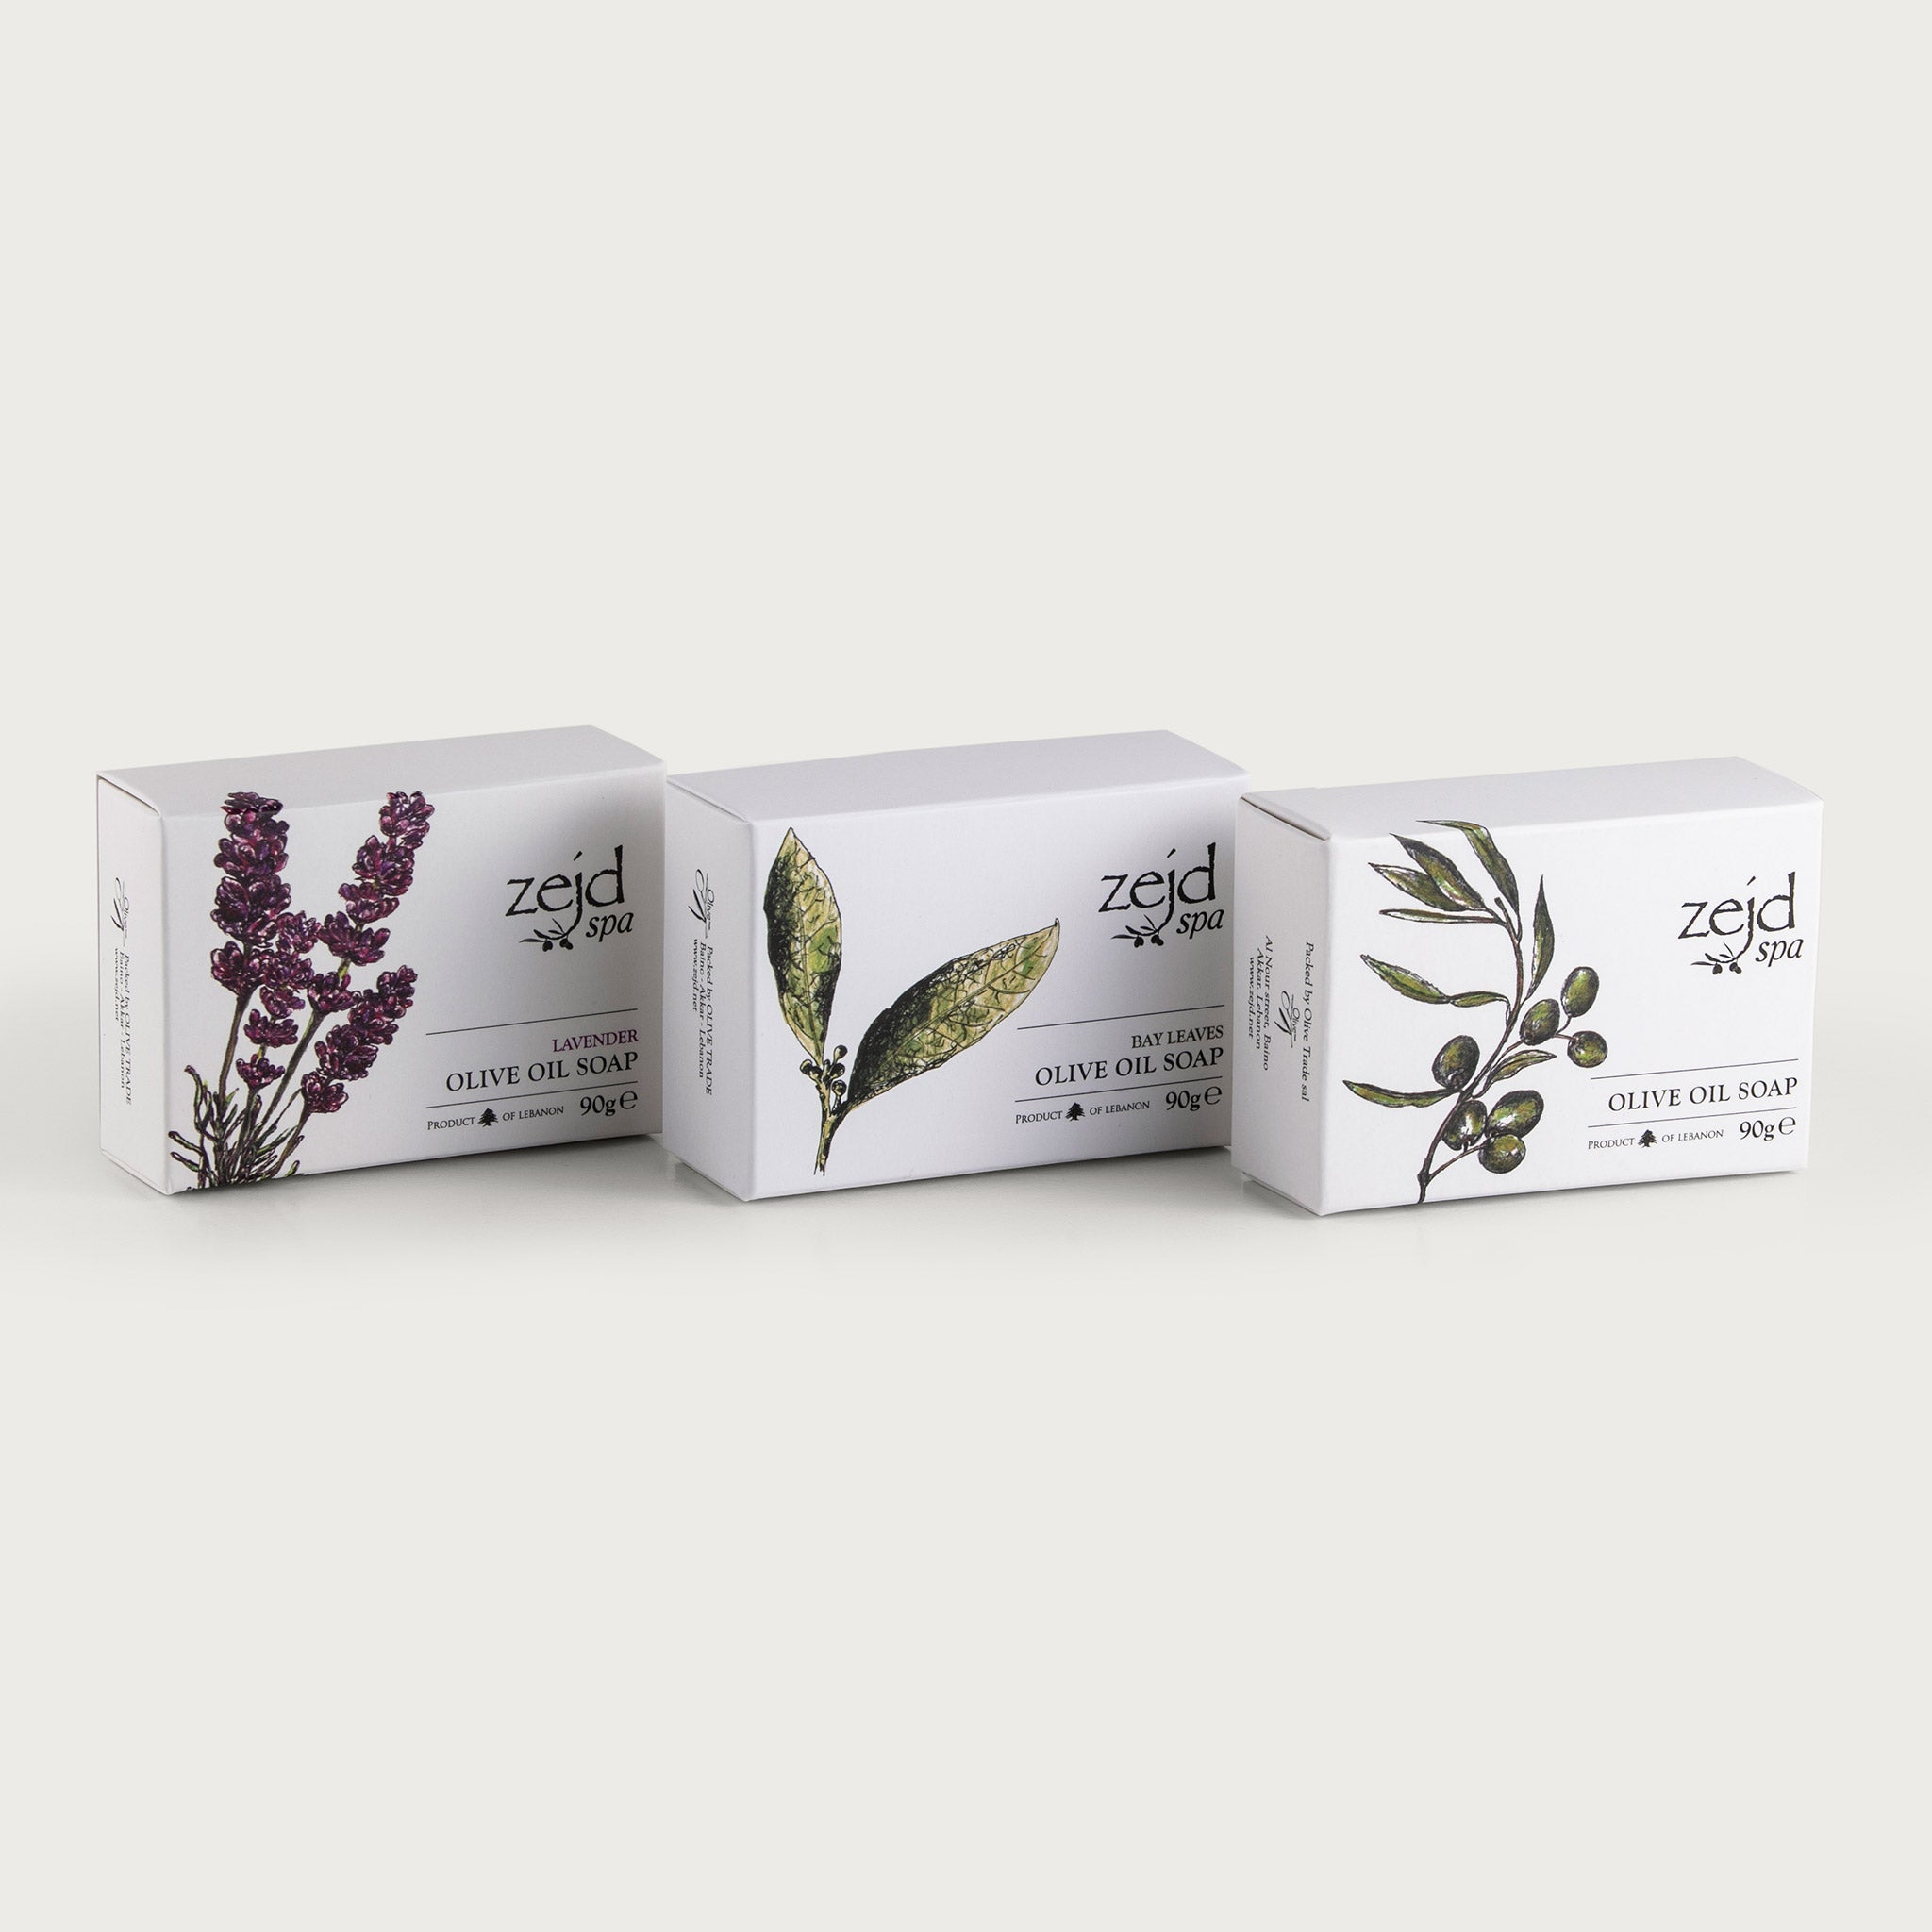 This beautifully designed white box houses three individually packaged bars of soap inside. Each package is white in color and features images representing their individual scents: lavender, laurel, and olive oil.